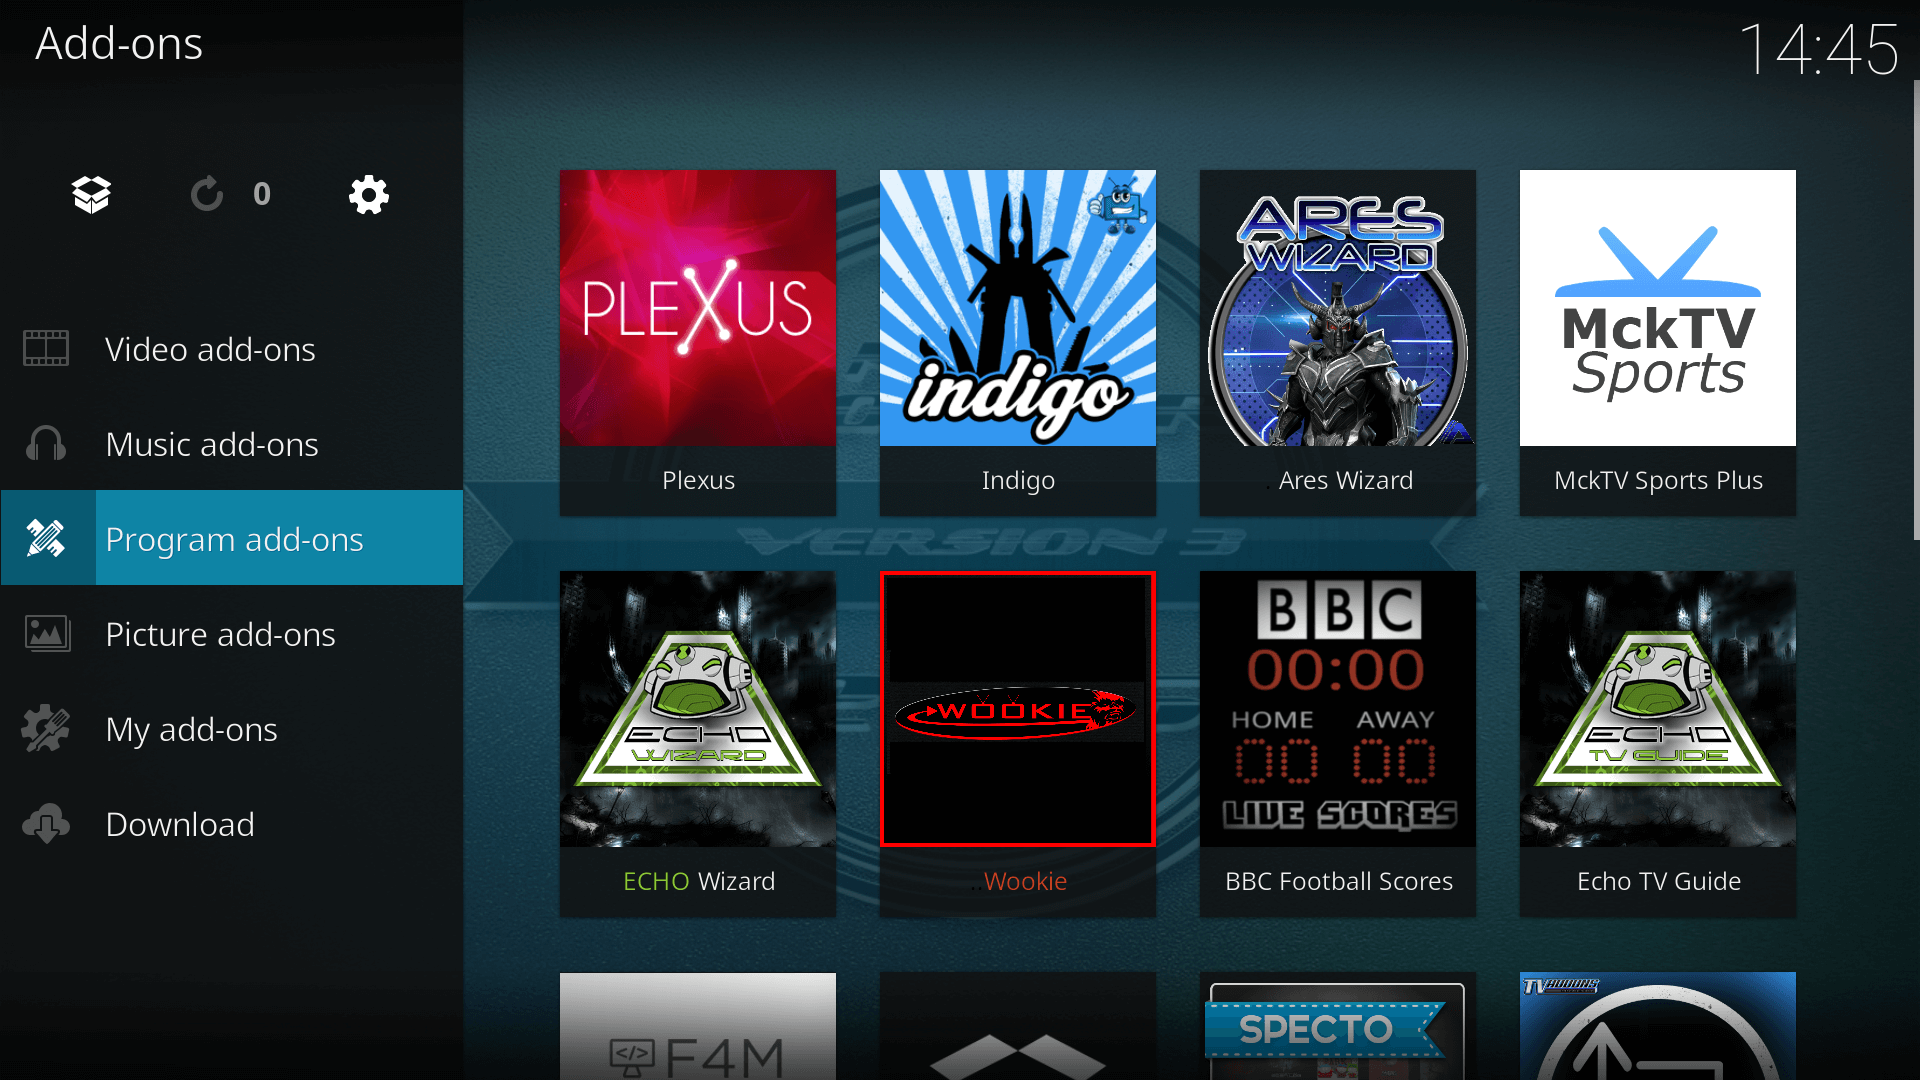 Install Ace Stream and Working version of Plexus on your device Kodi 17.1 on PC